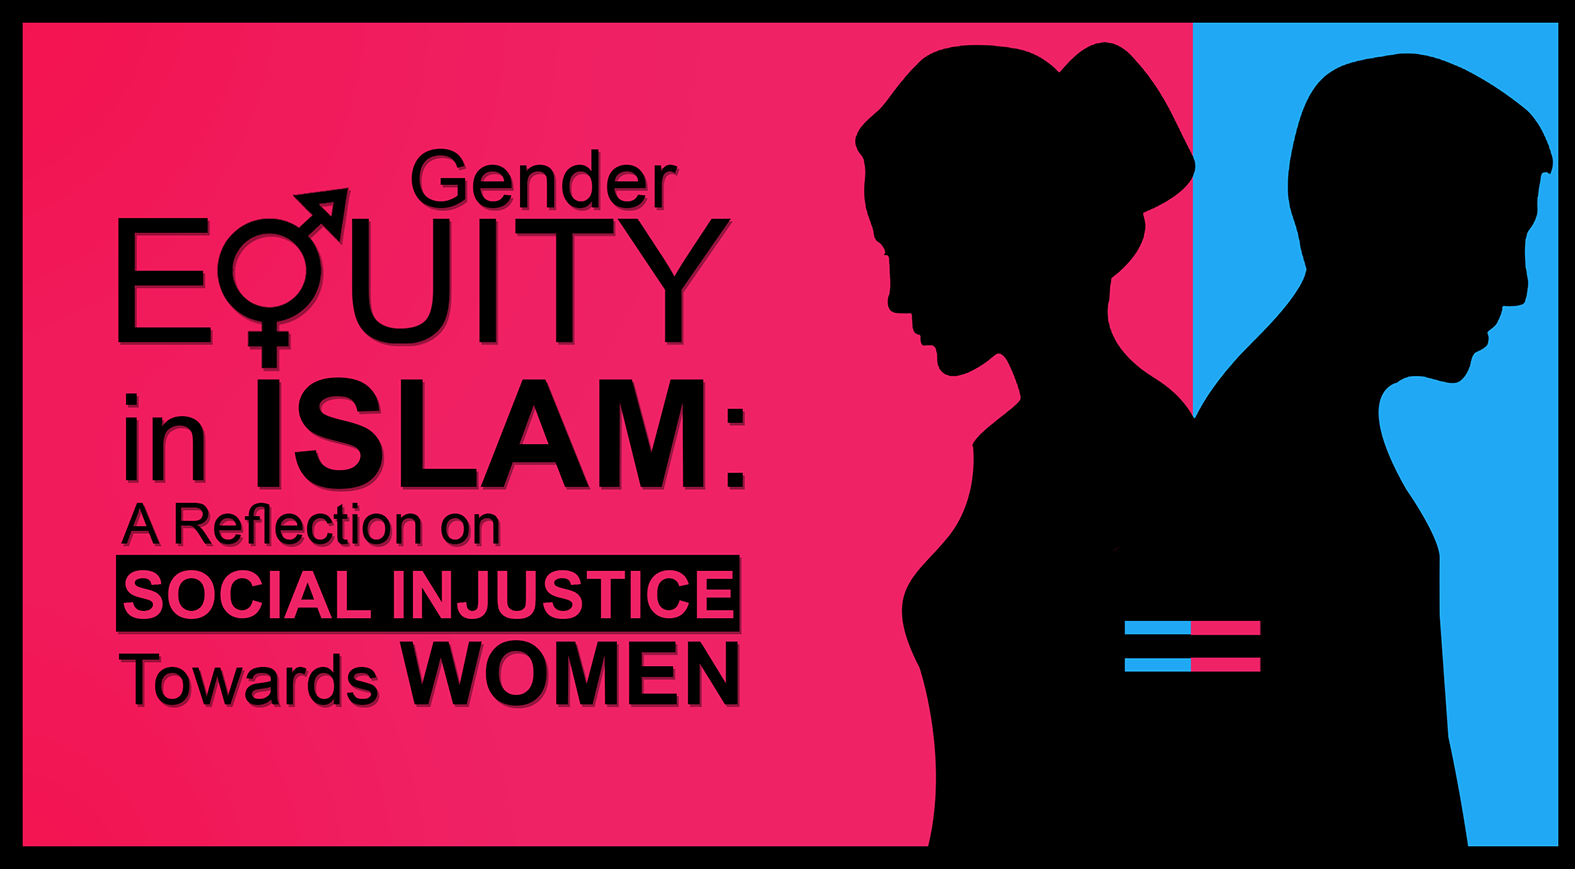 Gender Equity in Islam: A Reflection on Social Injustice Towards Women